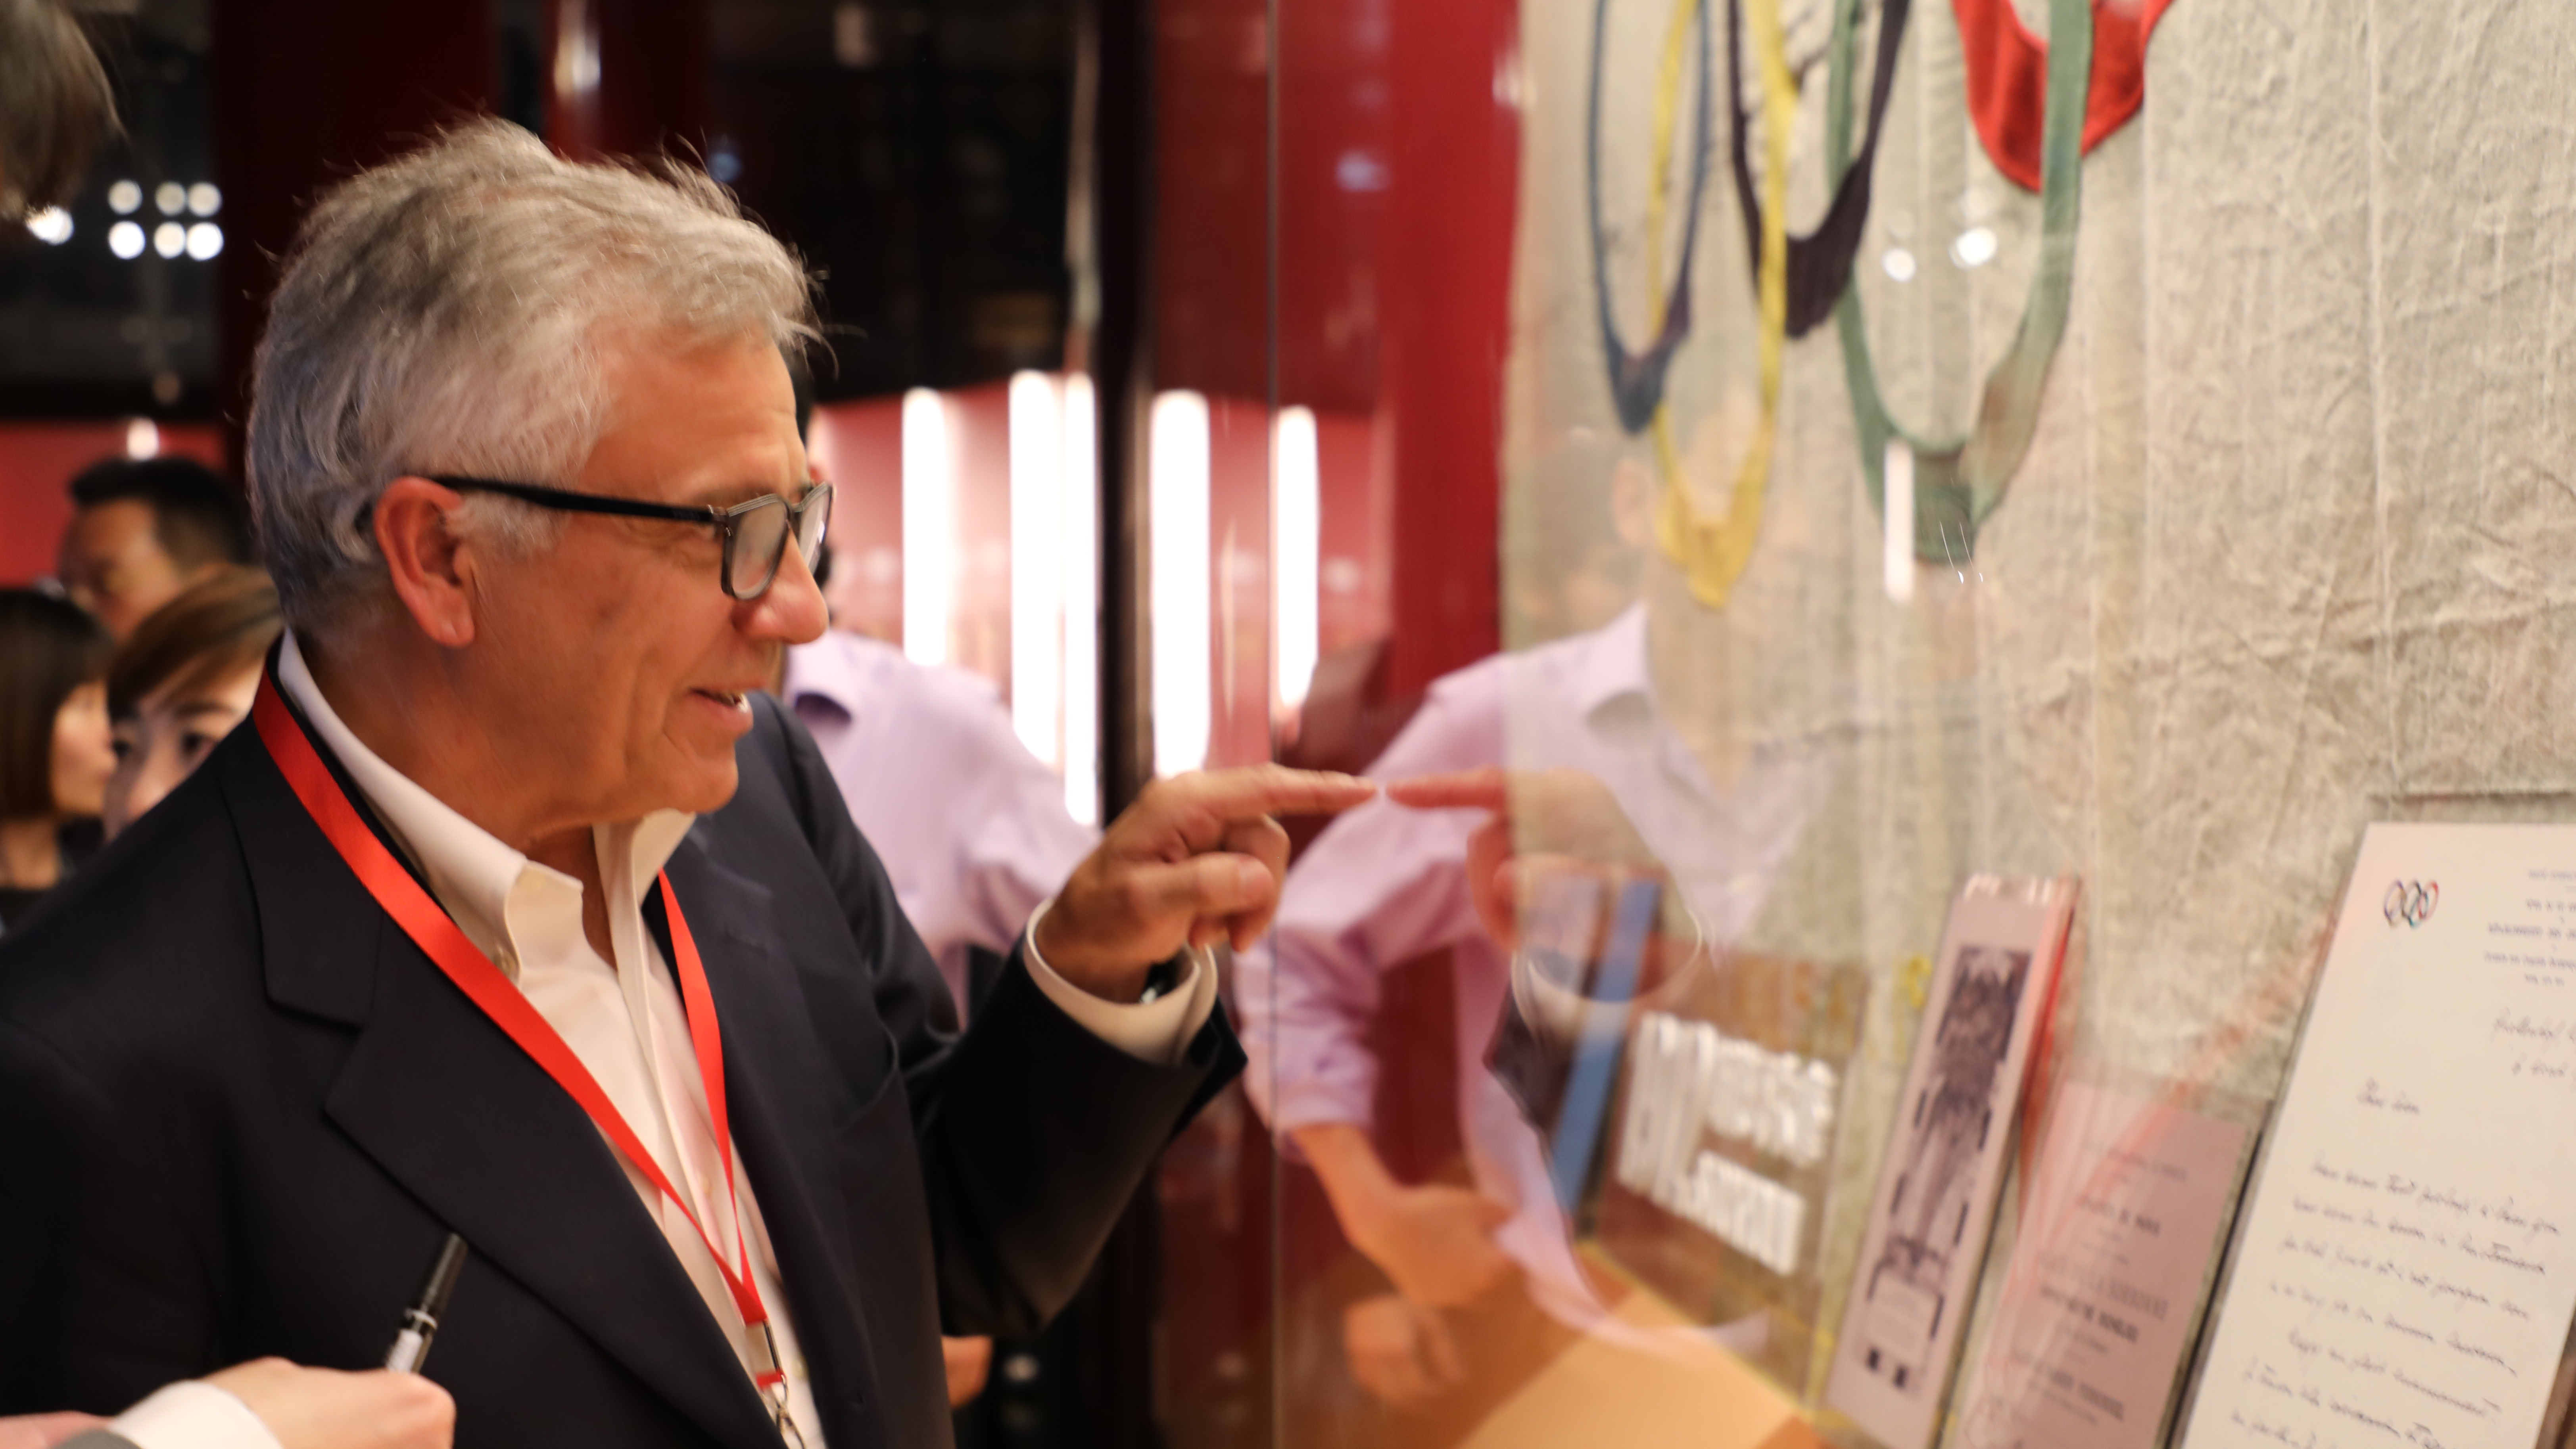 A visit to the IOC Precious Relics section at the Beijing Olympic Expo Exhibition Hall in the Forbidden City, Beijing, 2019. /Samaranch Foundation